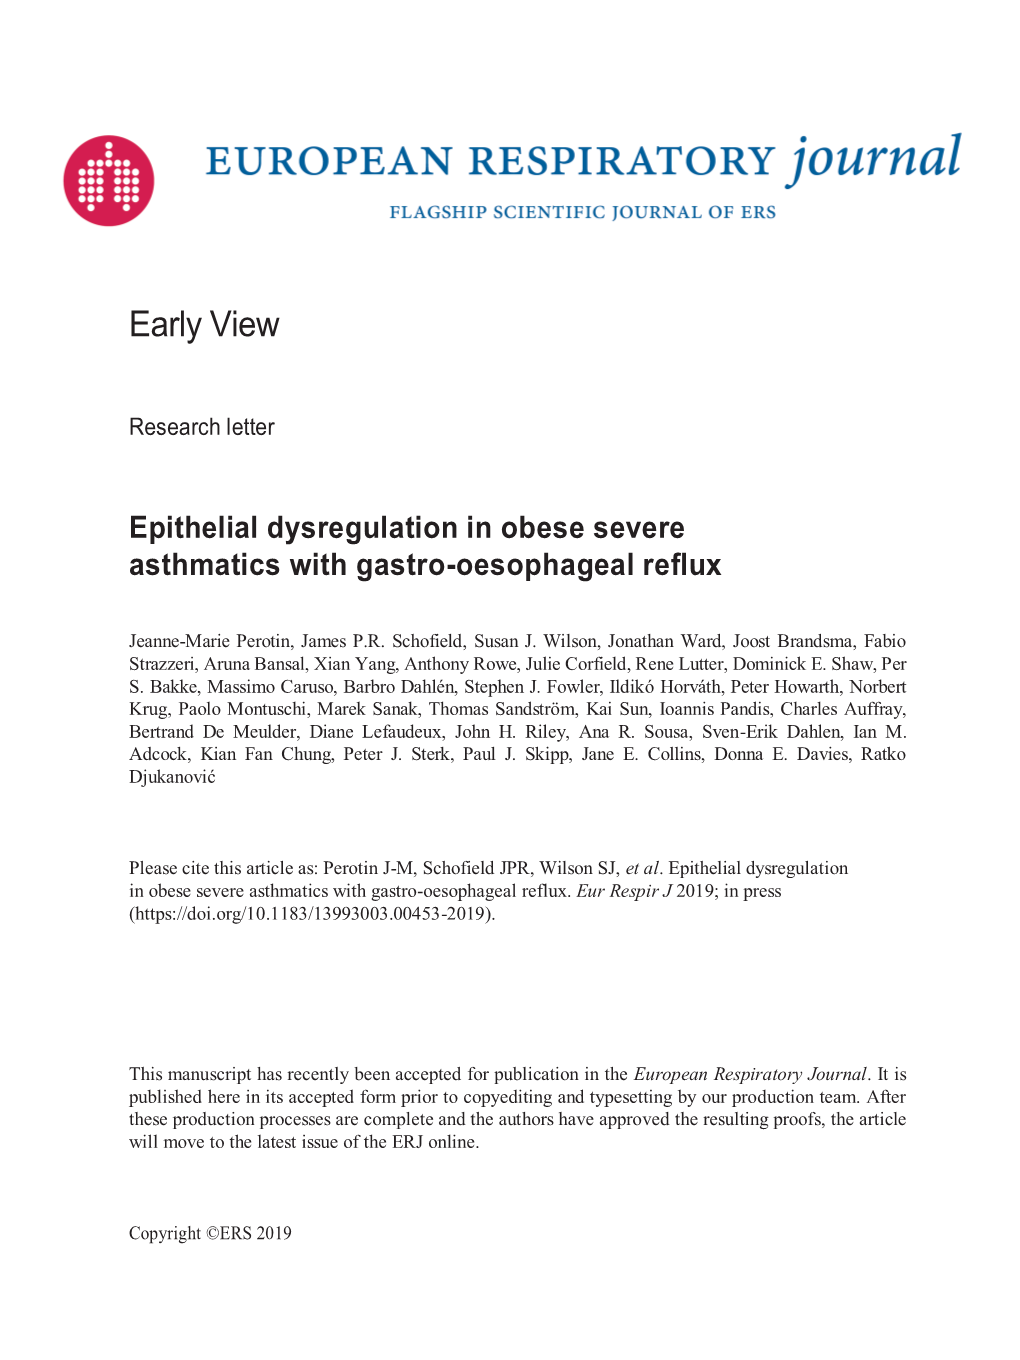 Epithelial Dysregulation in Obese Severe Asthmatics with Gastro-Oesophageal Reflux